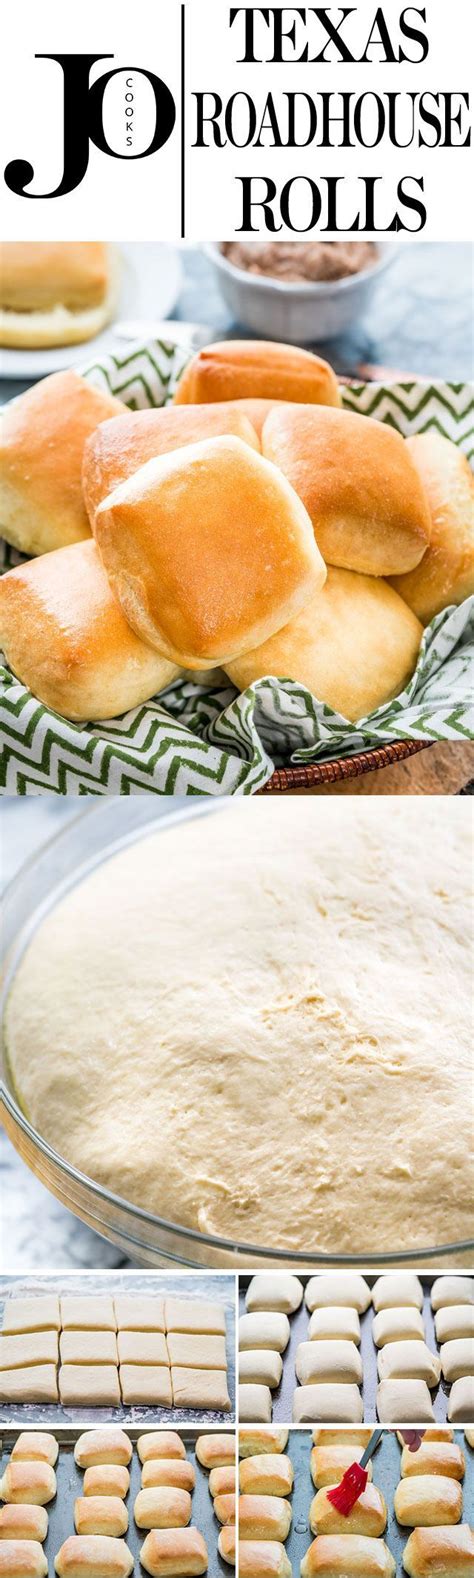 Texas roadhouse menu and prices. Texas Roadhouse Rolls - copycat recipe of the Texas ...